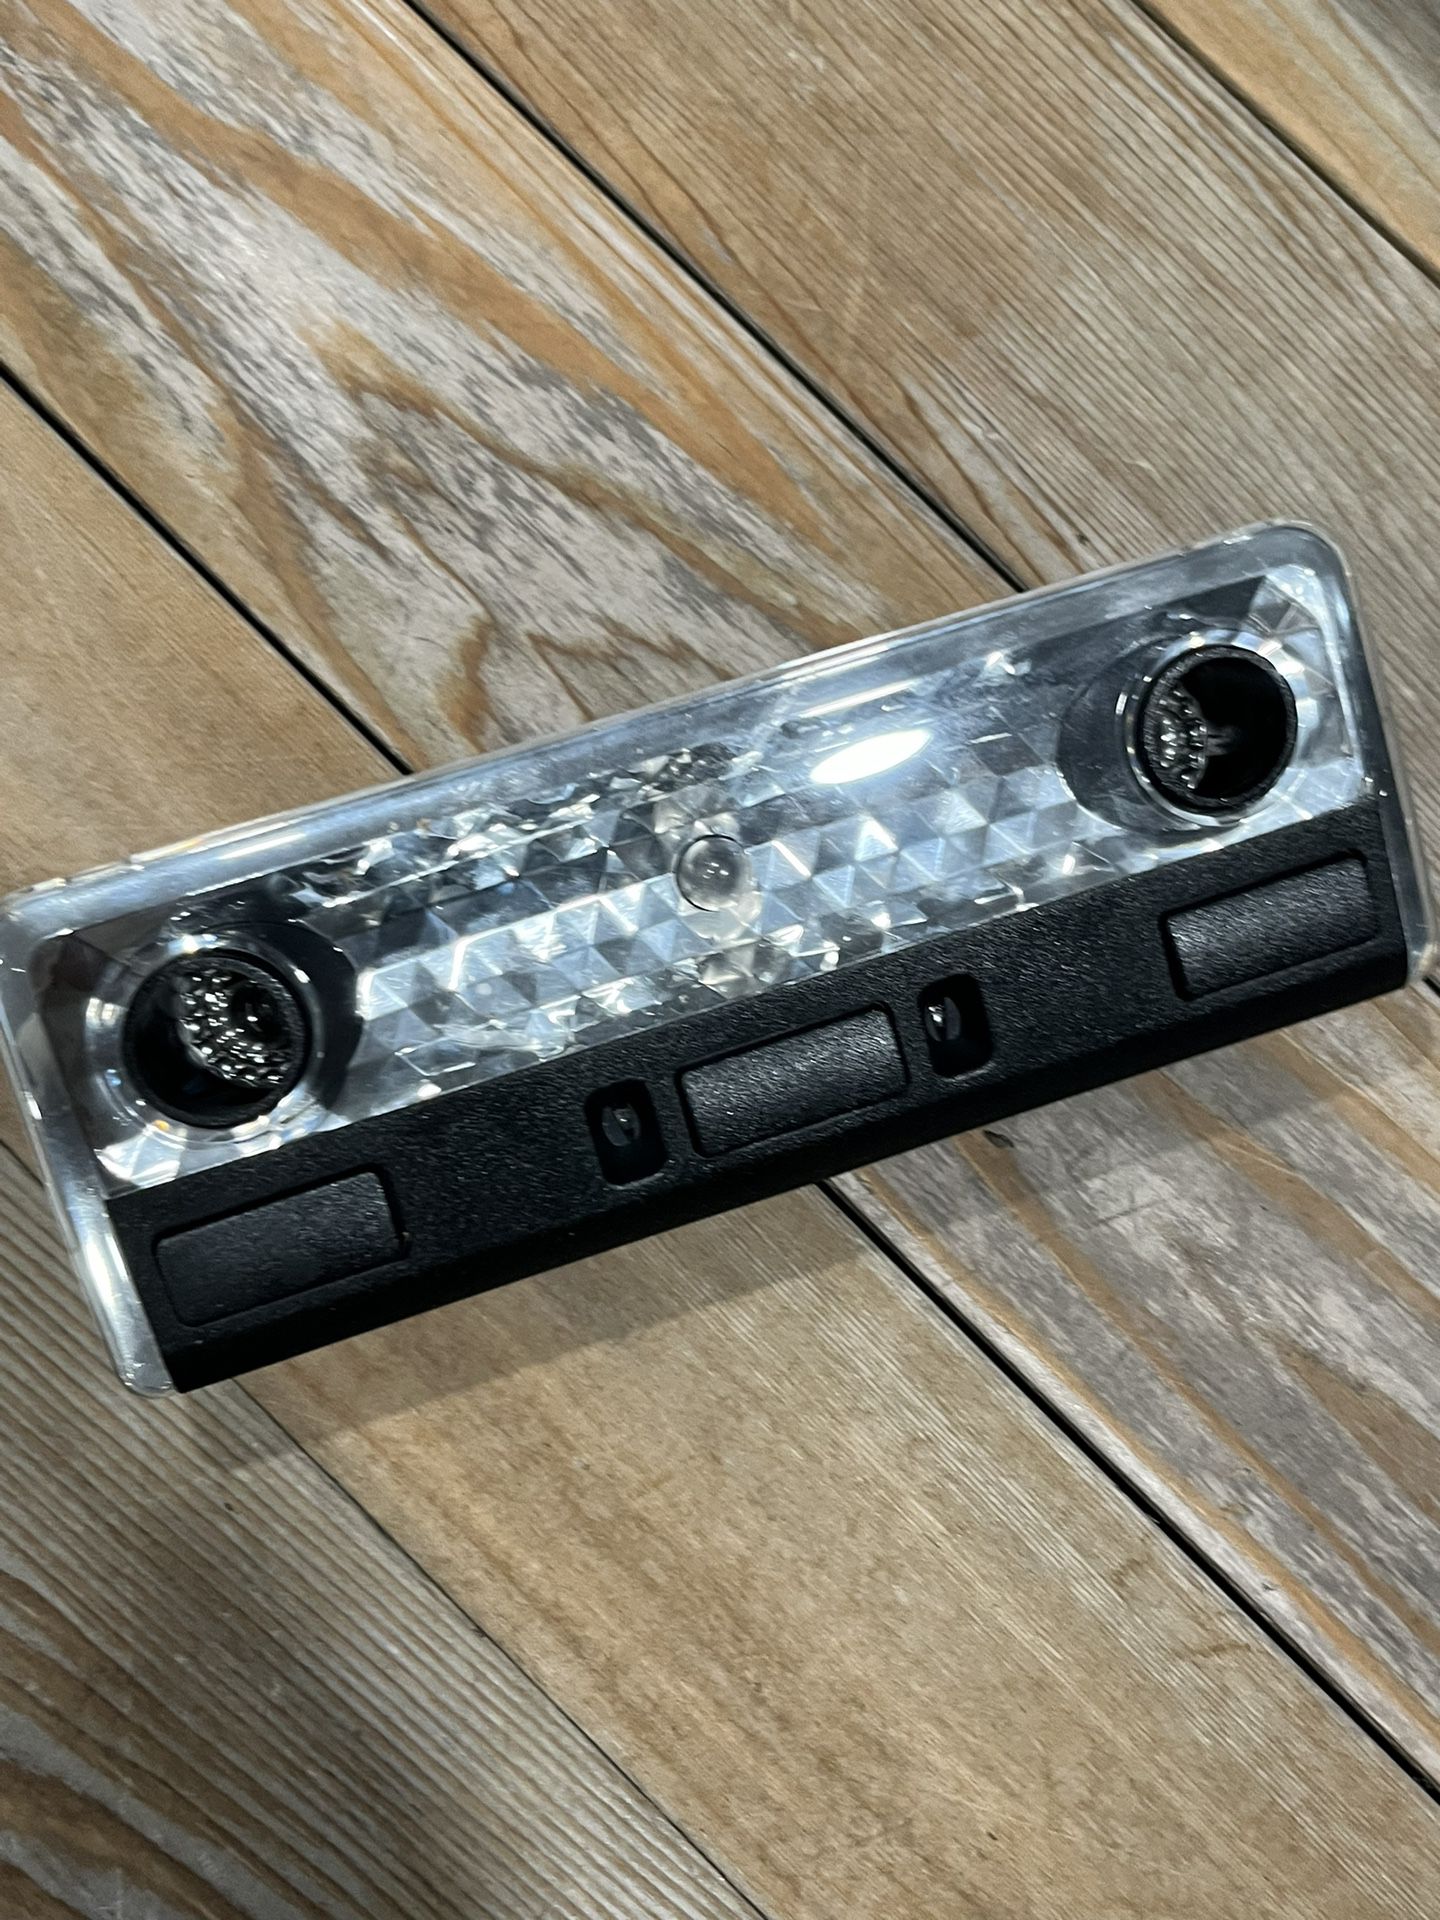 BMW E46 3-Series M3 Interior Reading Light Hella (contact info removed)4929 OEM works perfect